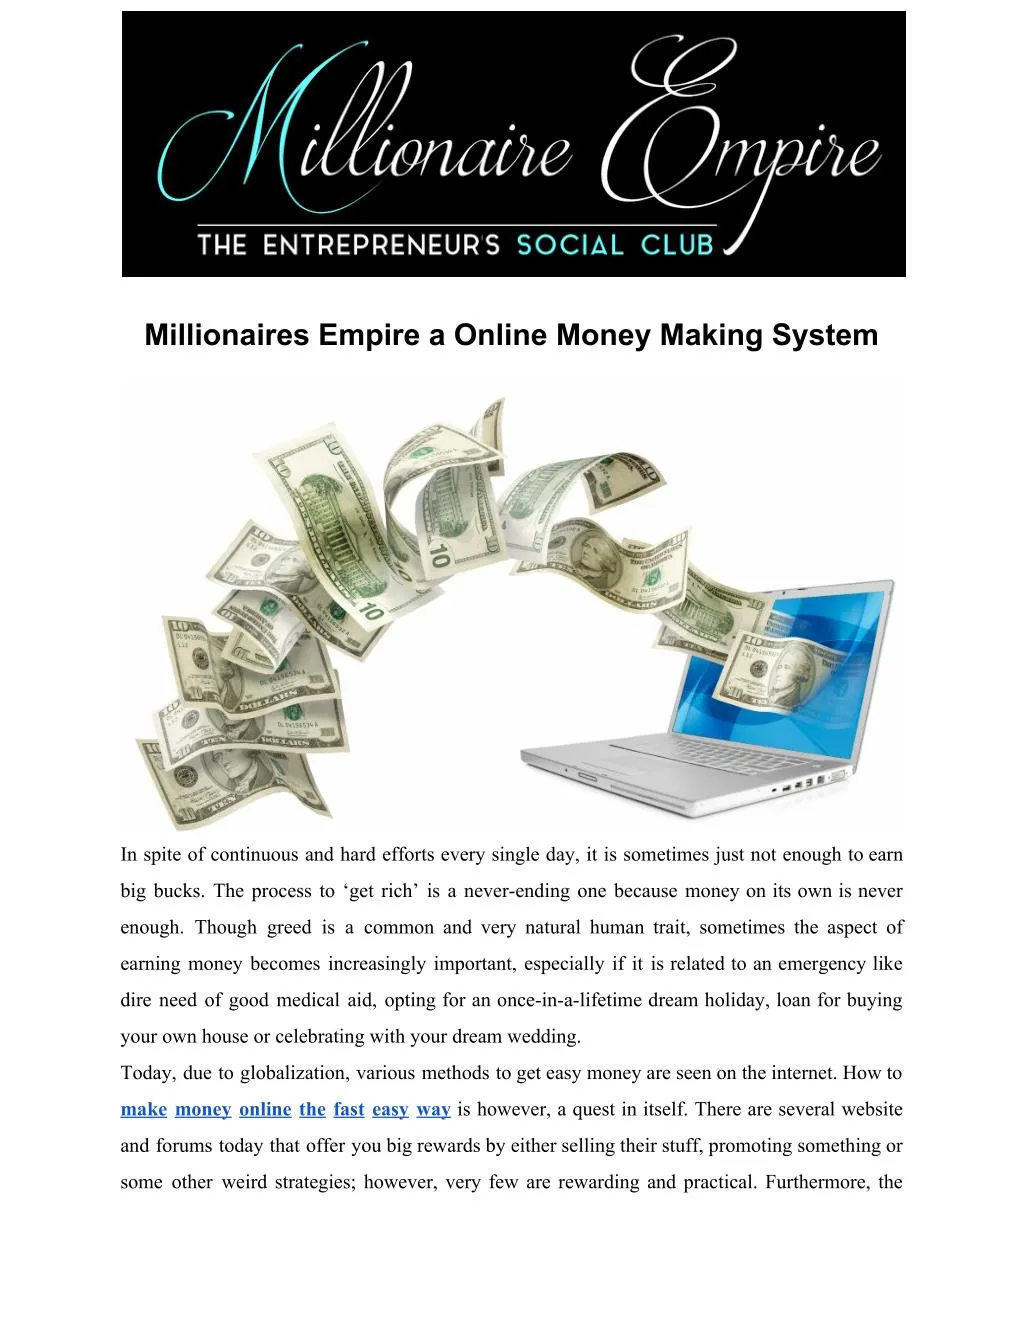 millionaires empire a online money making system